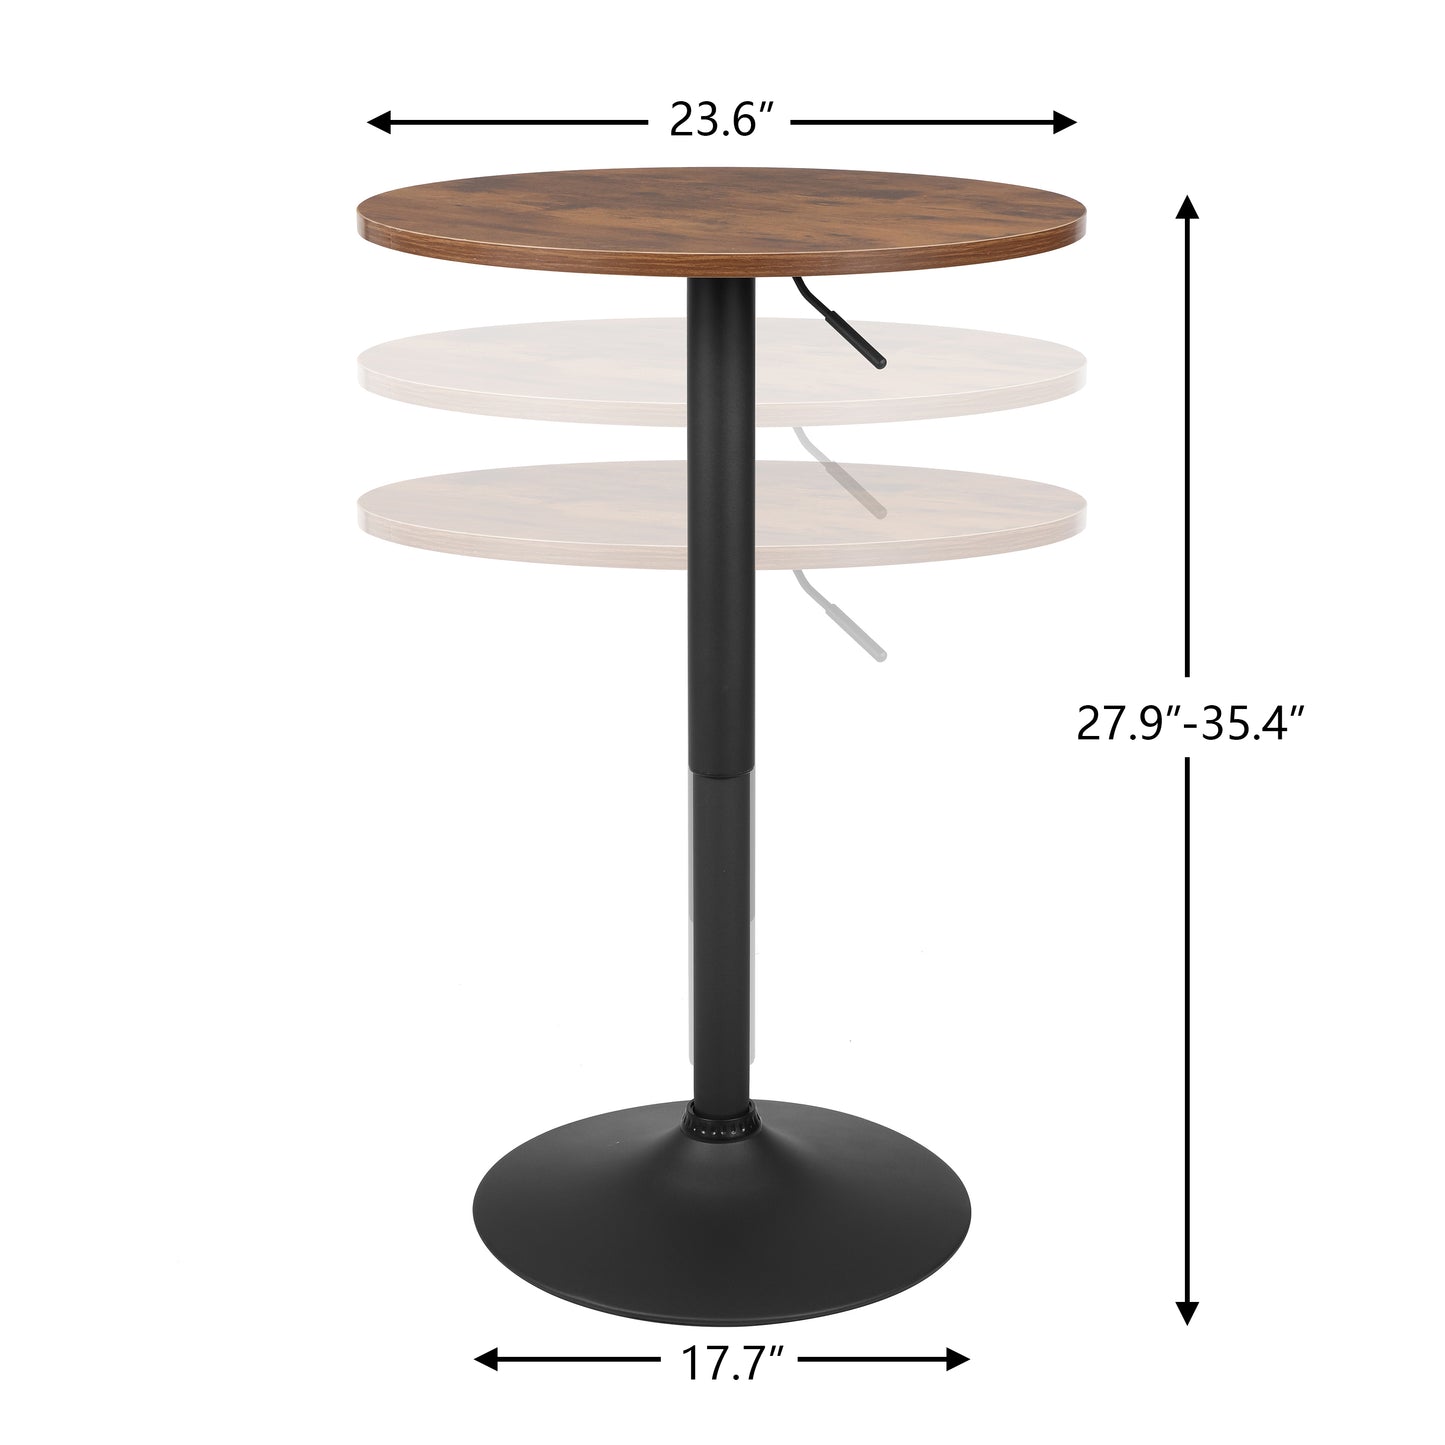 Finnhomy 23.6inches Round Cocktail Bar Table with Metal Base, Tall Bistro Pub Table, Adjustable 27.9''-36.2'' Counter Bar Height for Kitchen, Dining Room, Living Room, Easy Assembly, Rustic Brown，F20BT71T9542